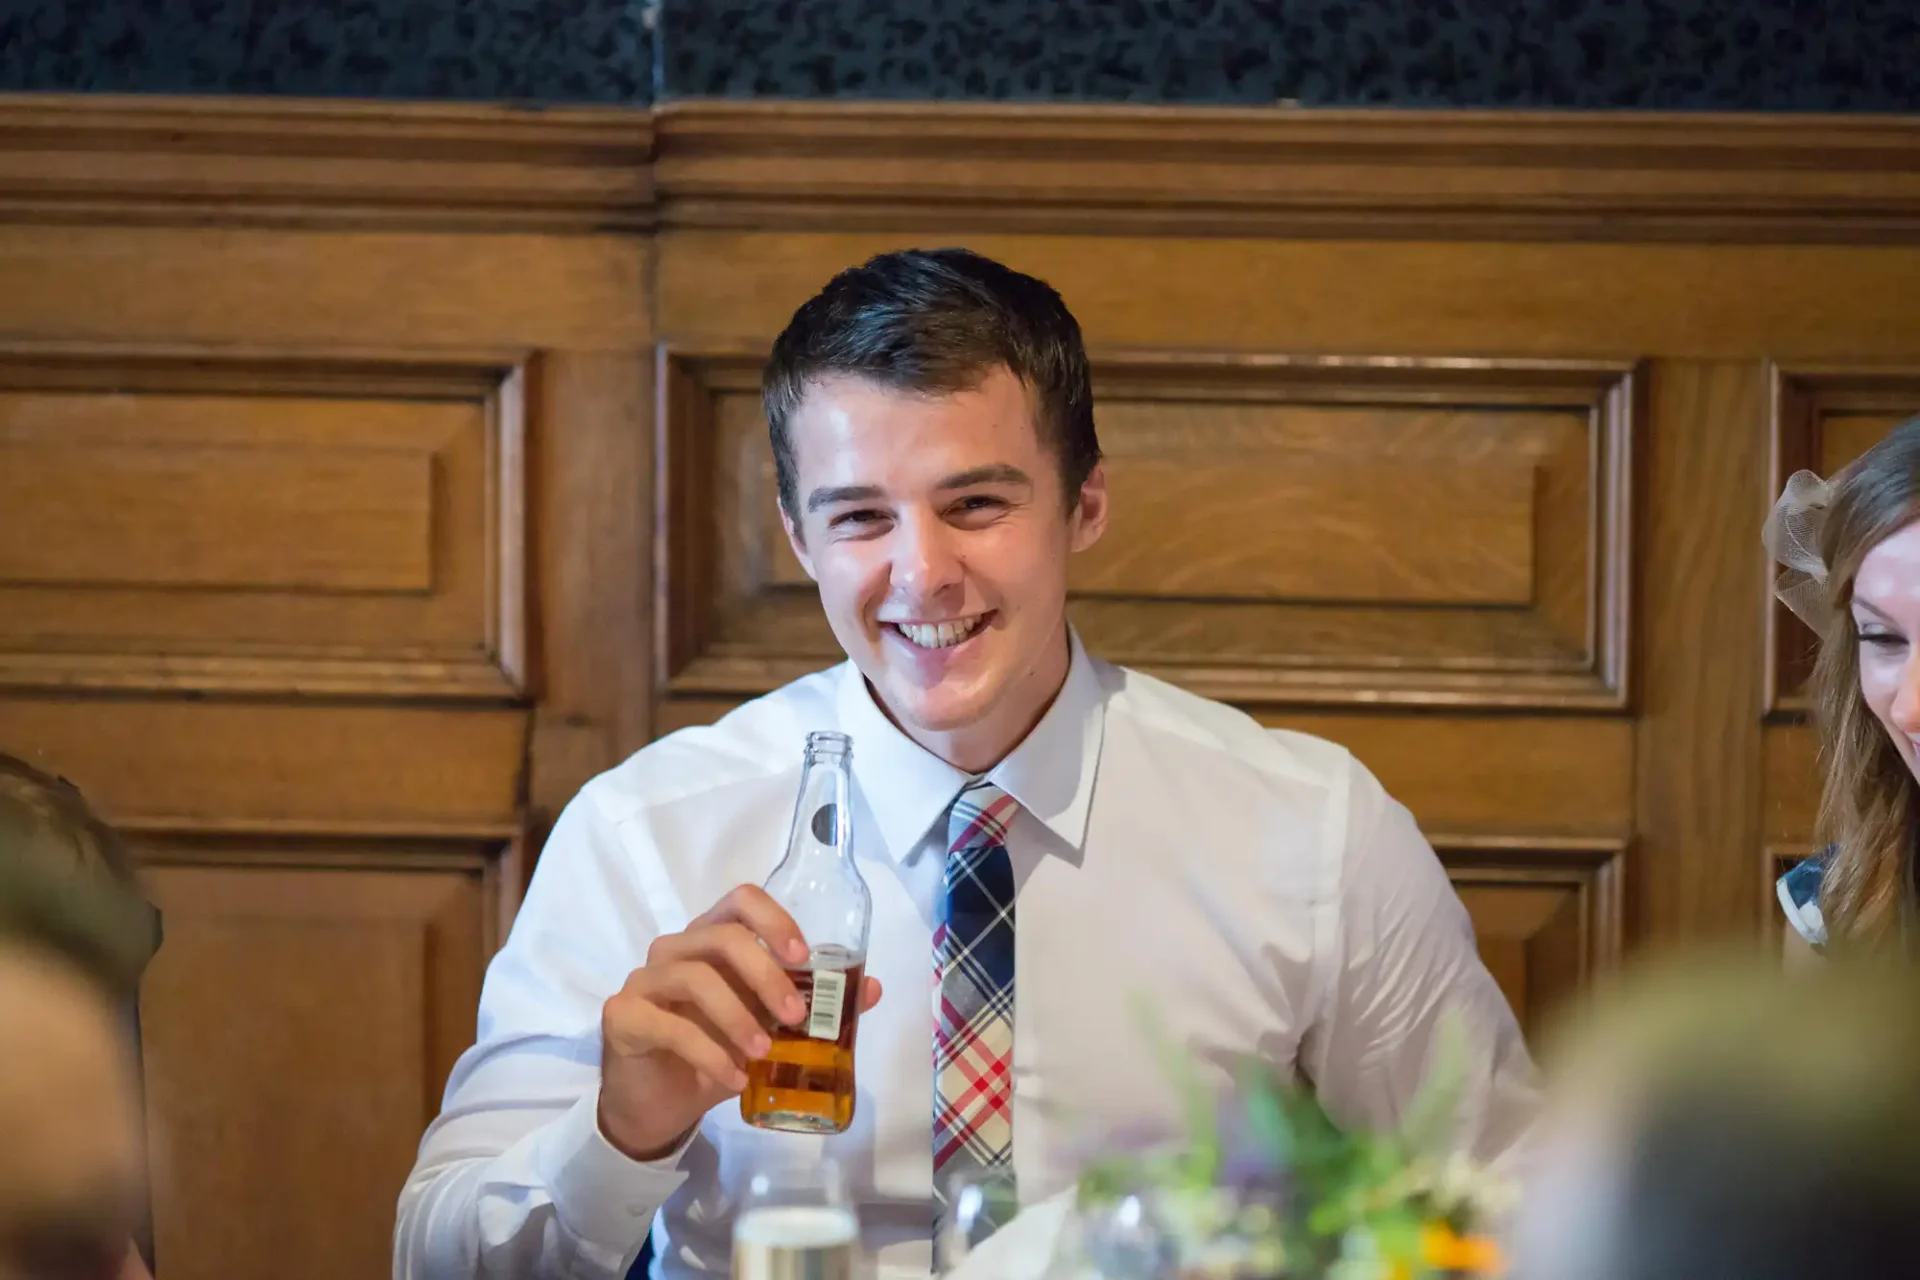 A smiling young man in a white shirt and plaid tie holding a bottle of beer at a formal event.